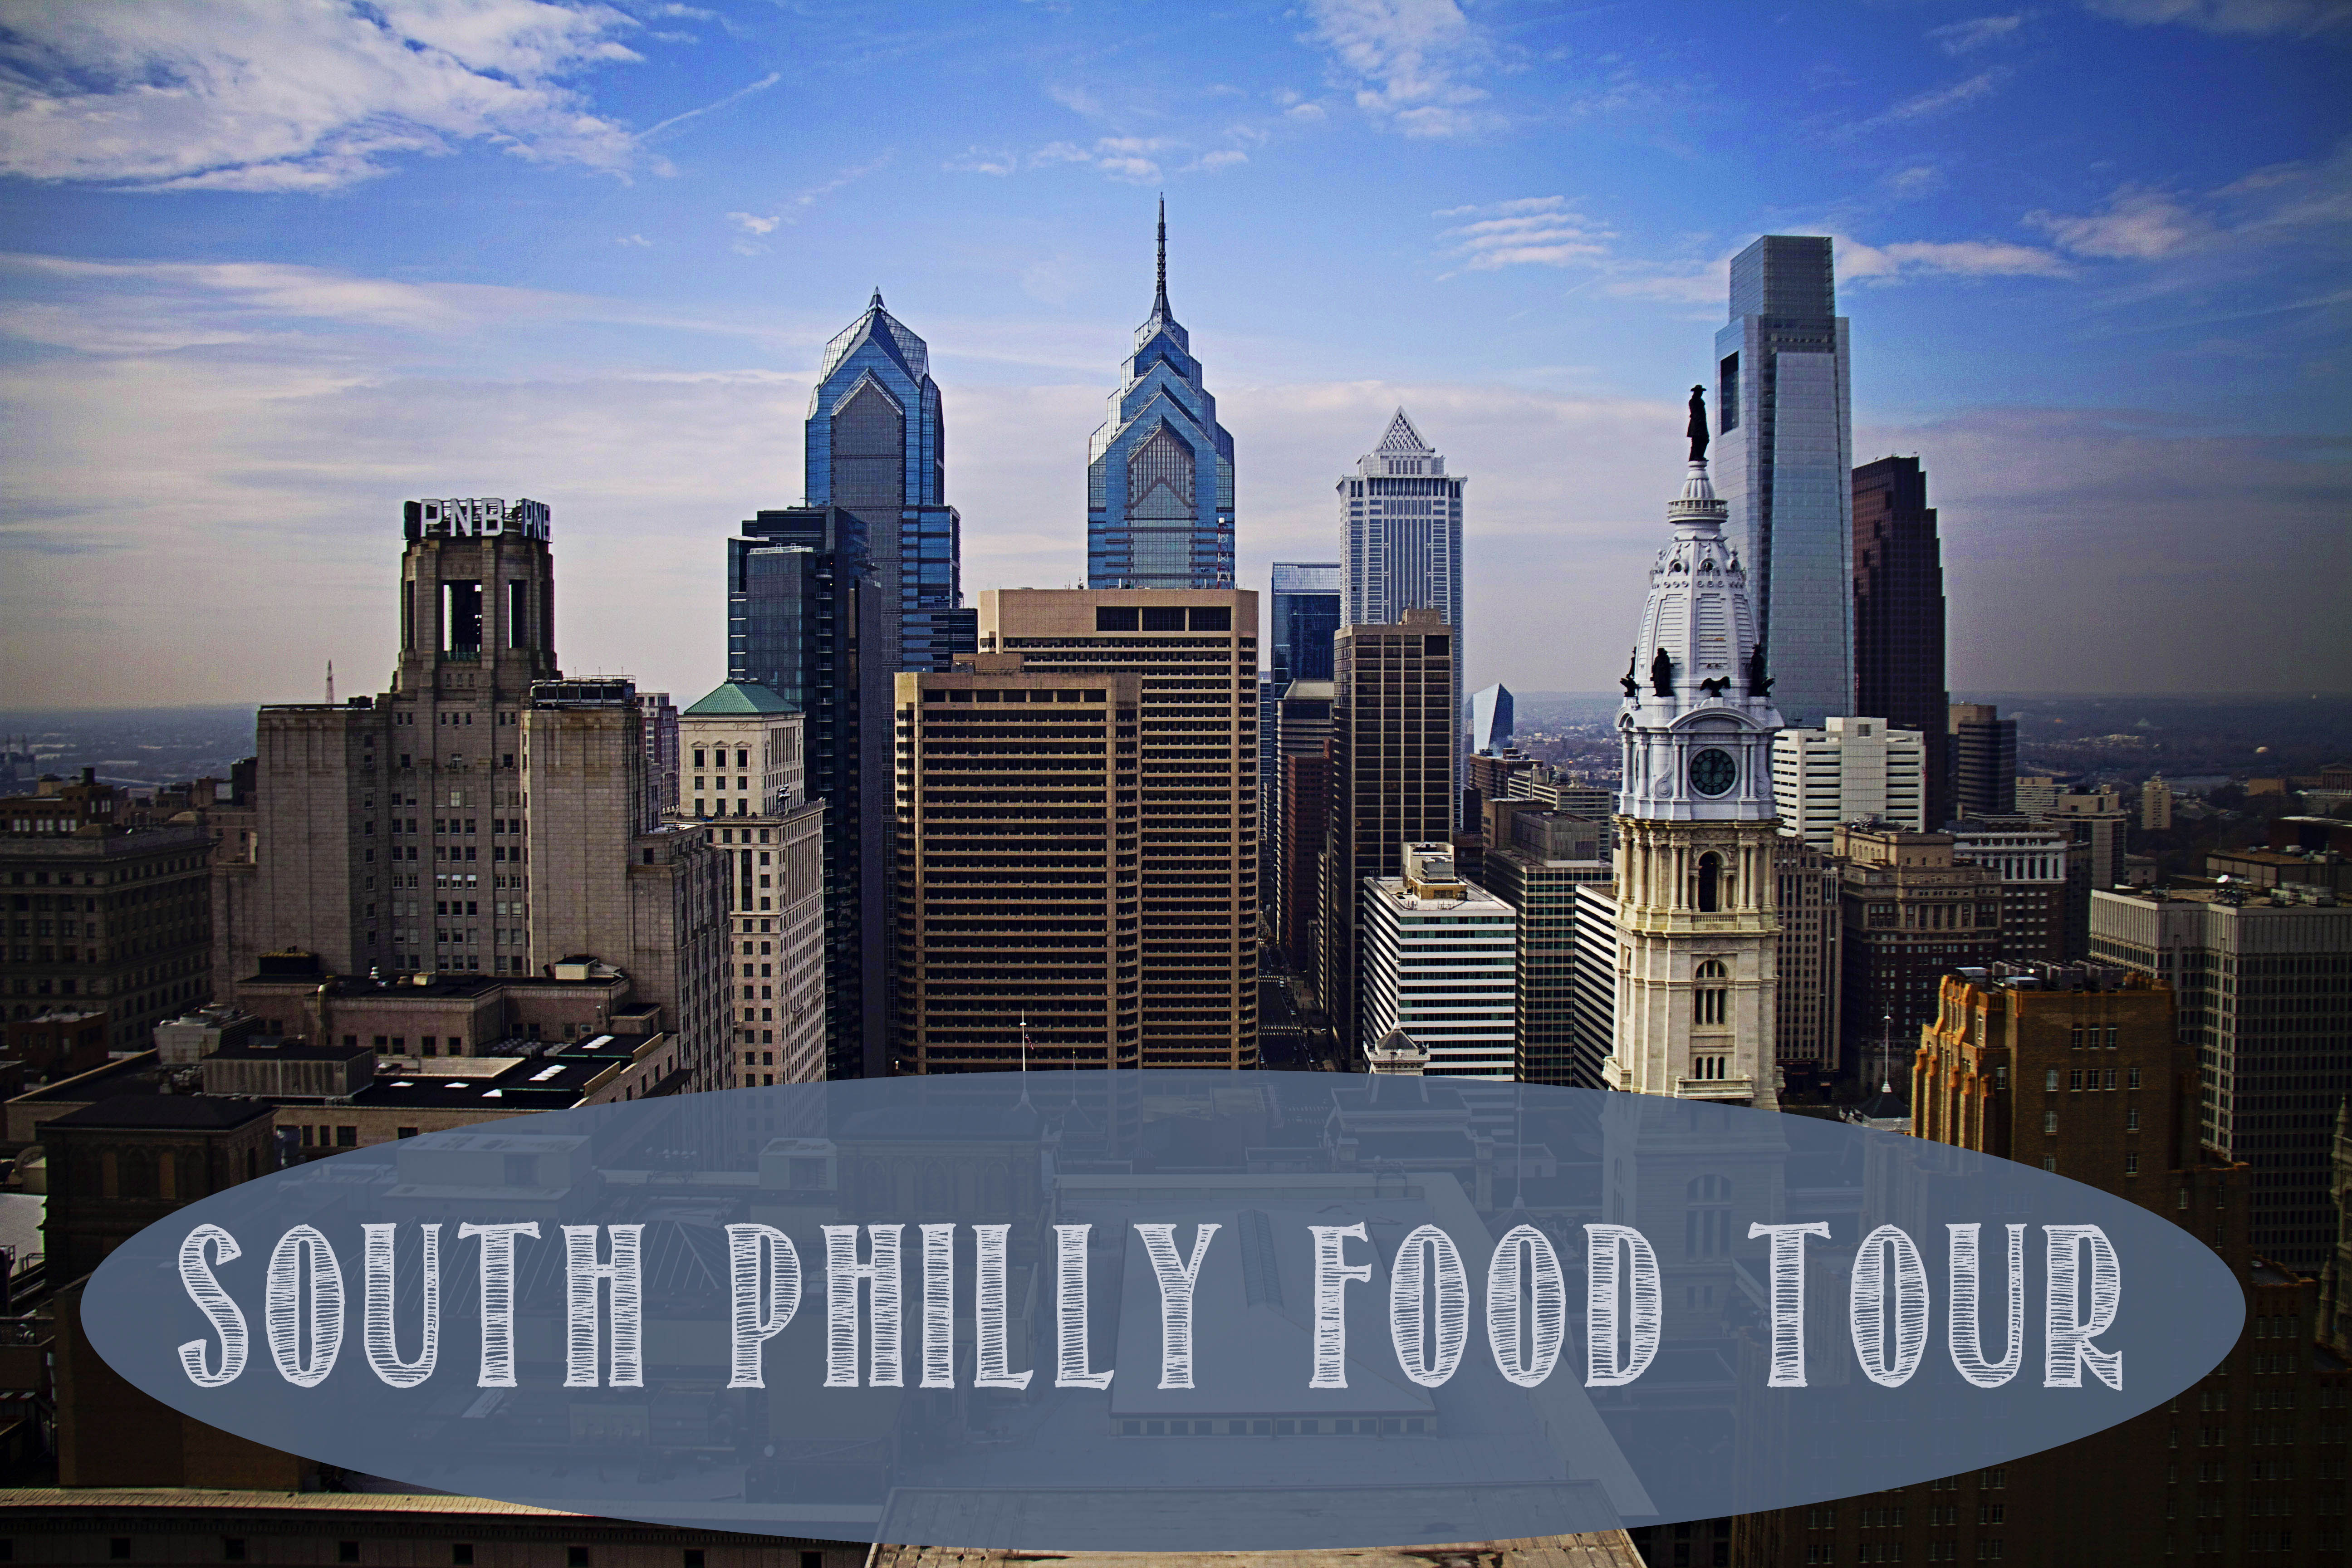 south philly food tour with jeet yet?